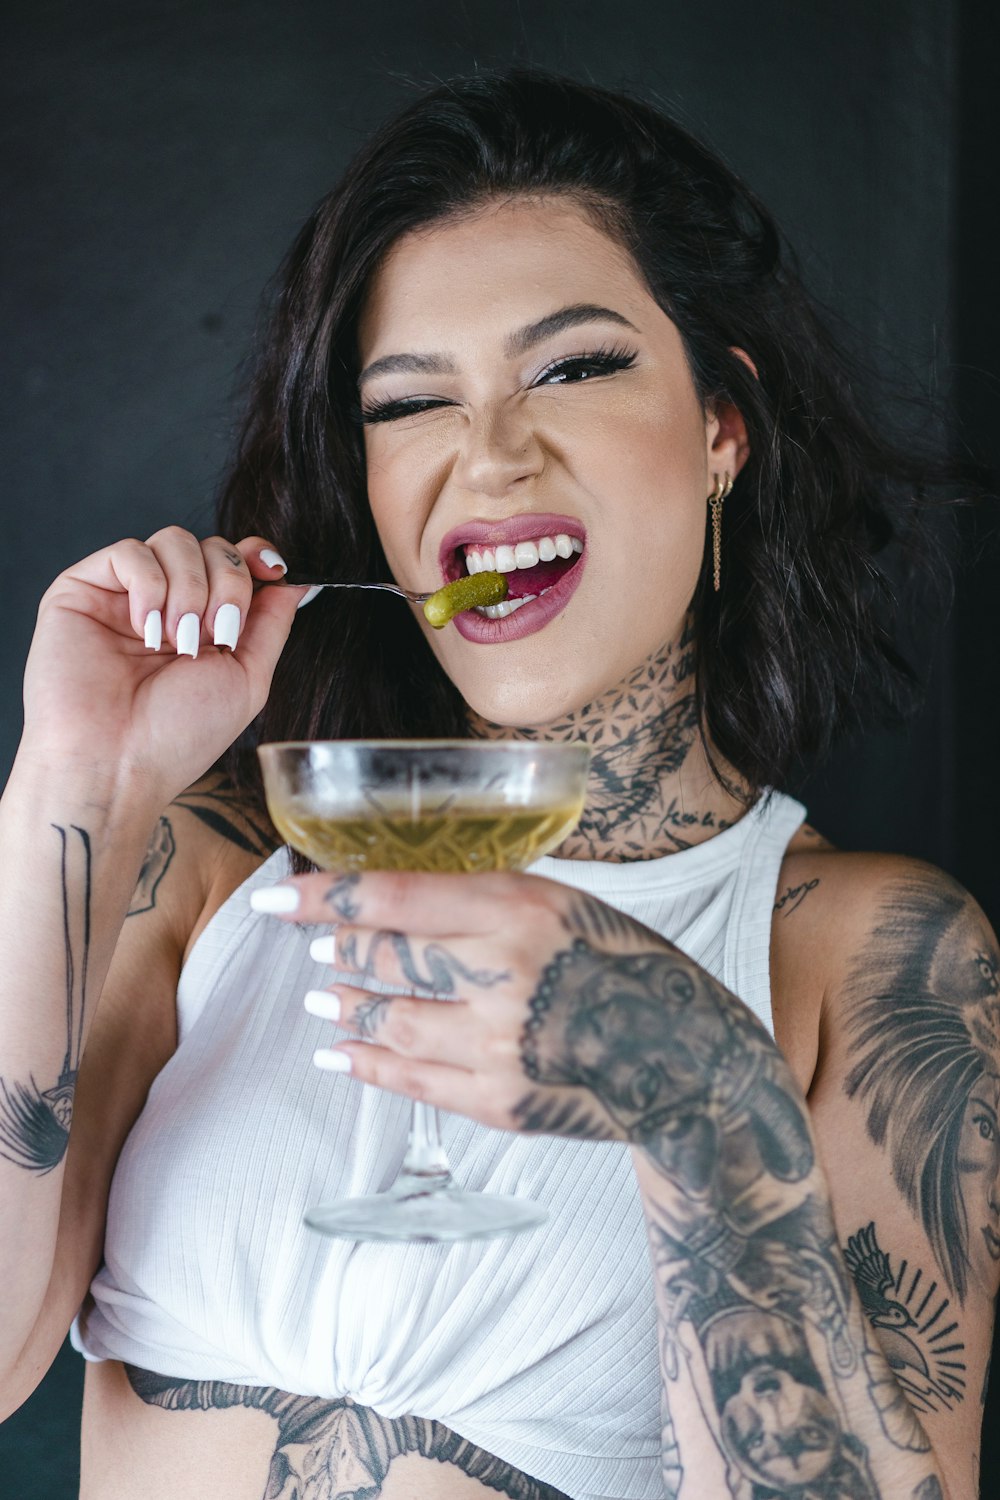 a woman with tattoos holding a glass of wine